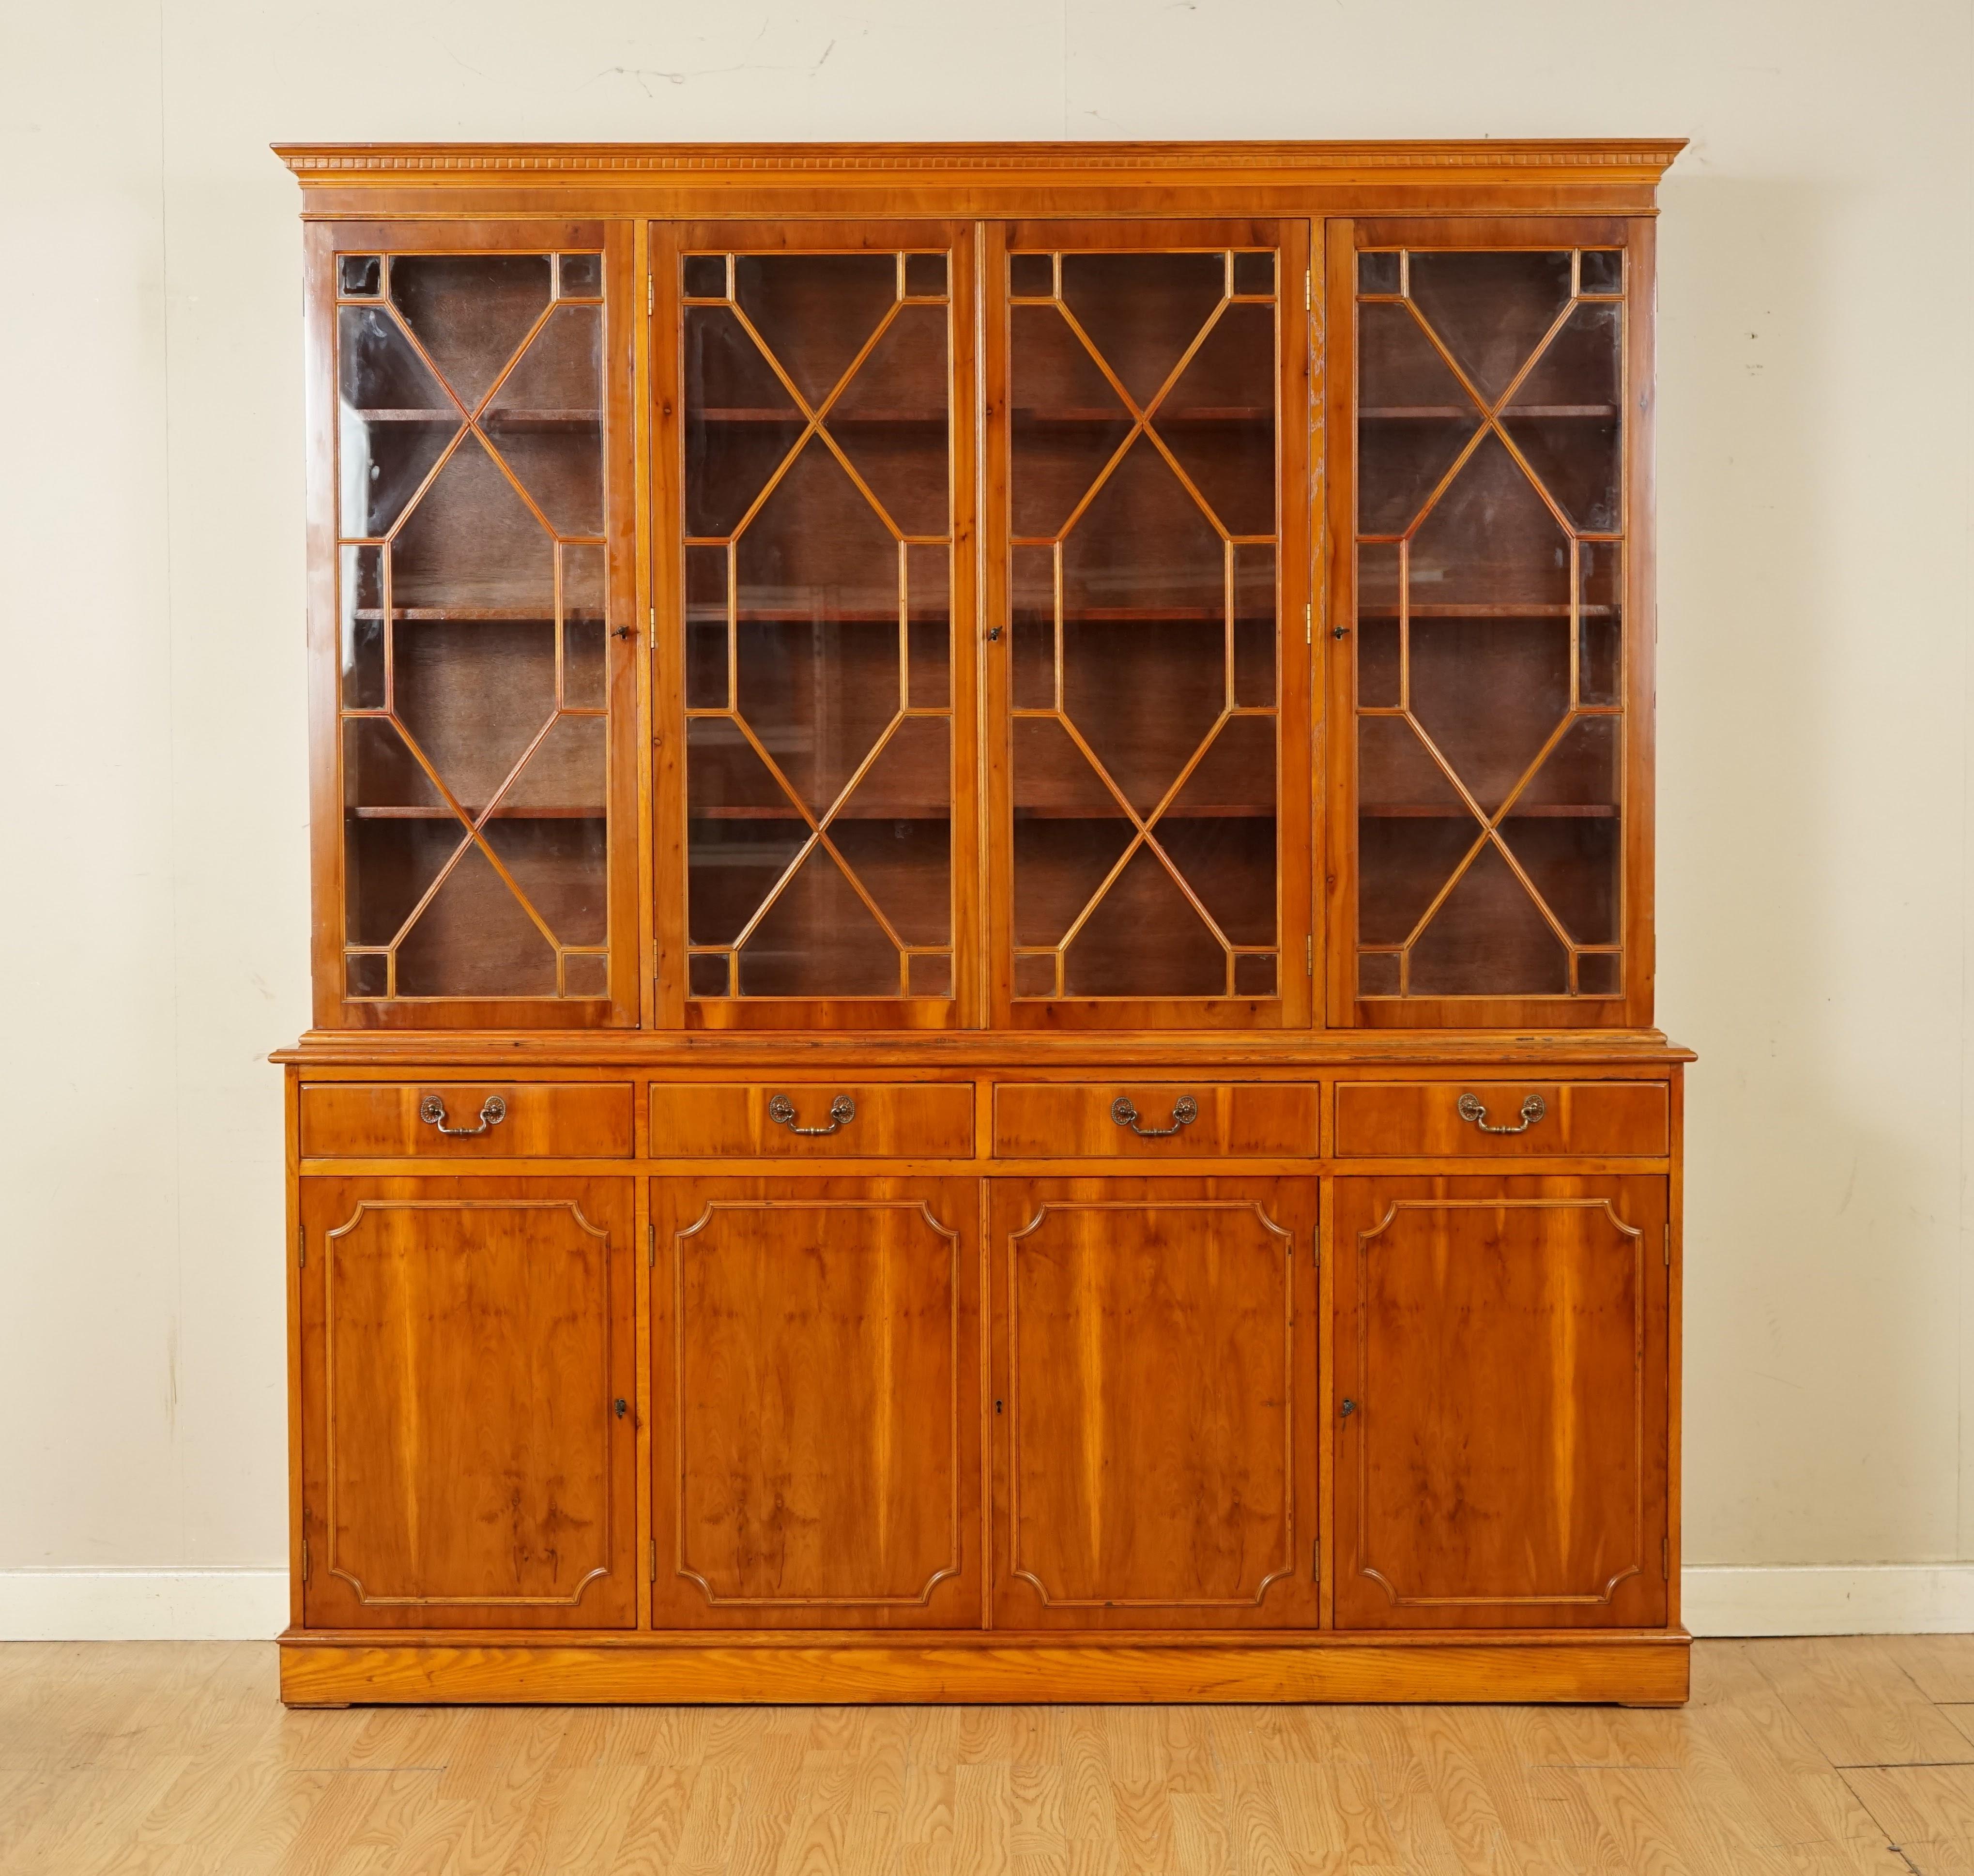 We are so excited to present to you this Lovely Burr Yew display cabinet.

A solid and well made cabinet with plenty if storage.

We have lightly restored this by giving it a hand clean all over, hand waxed and hand polish. 

Please carefully